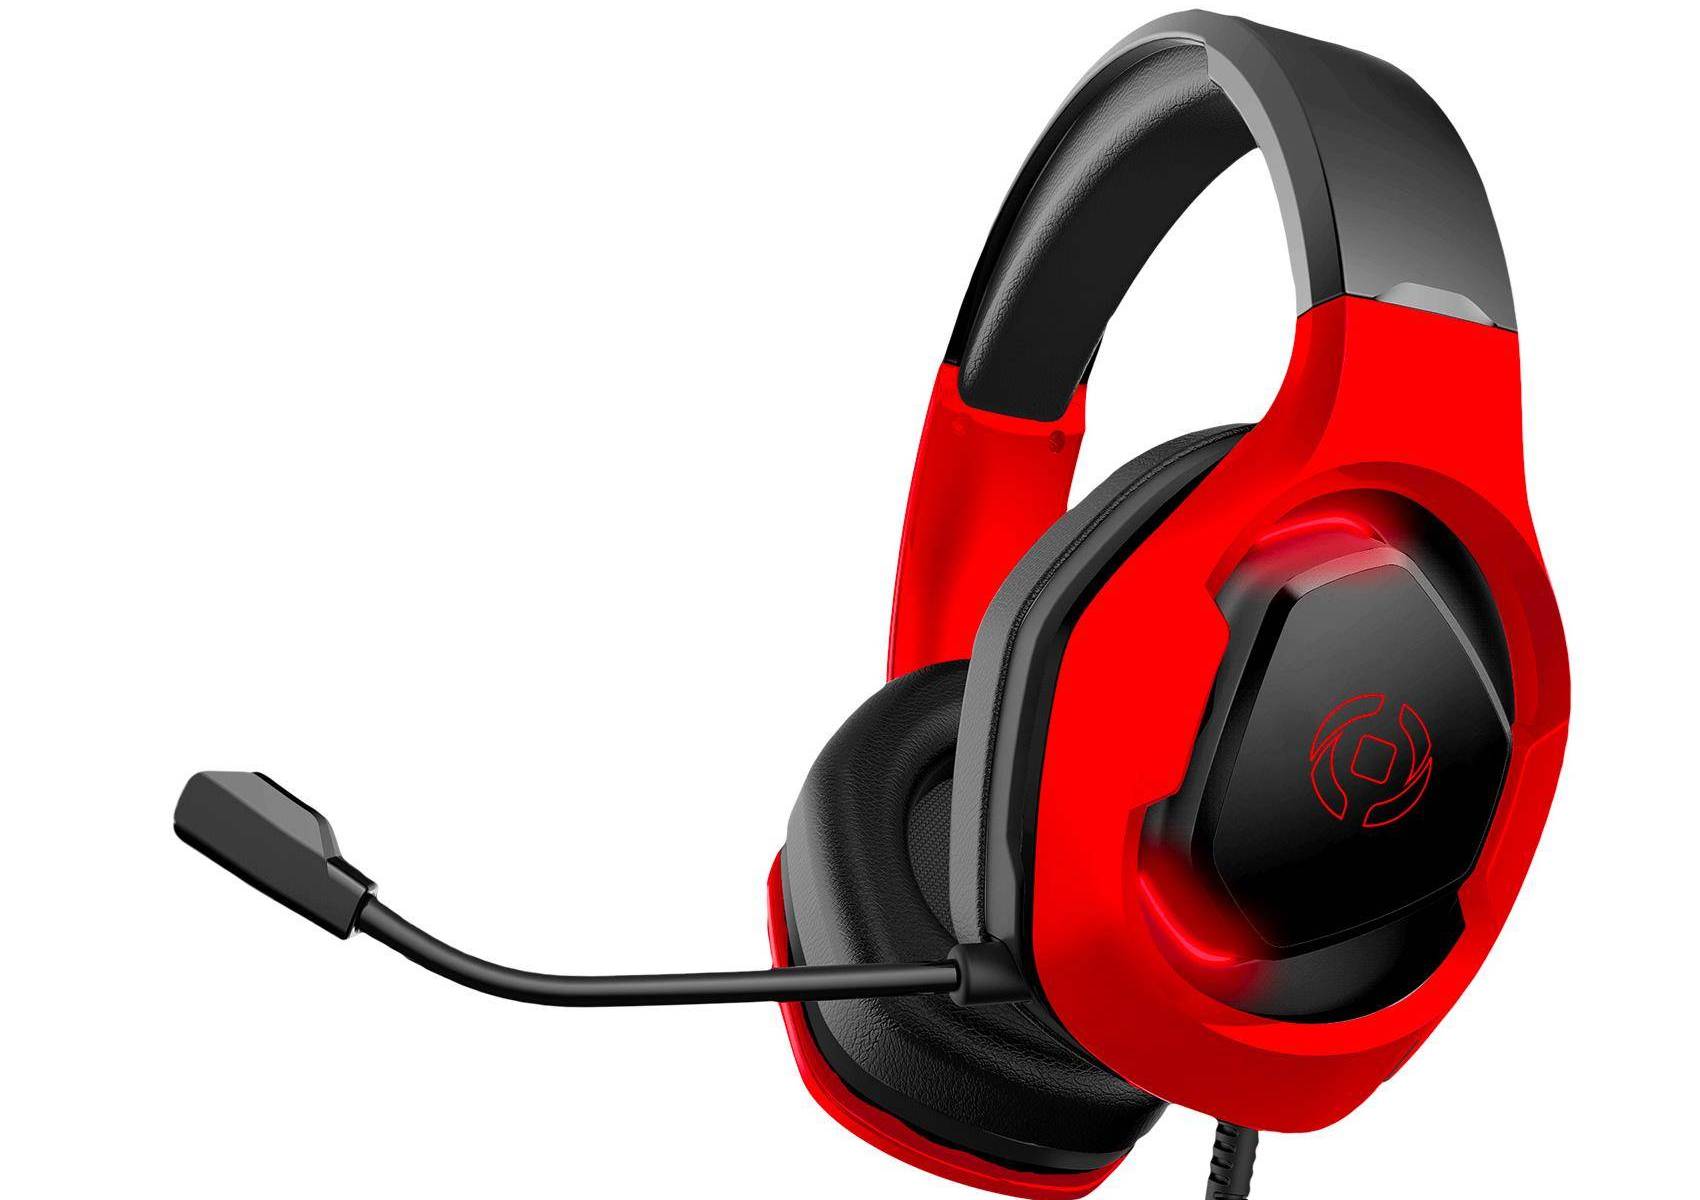 Celly Cyberbeat Wired Gaming Headphones Recensione